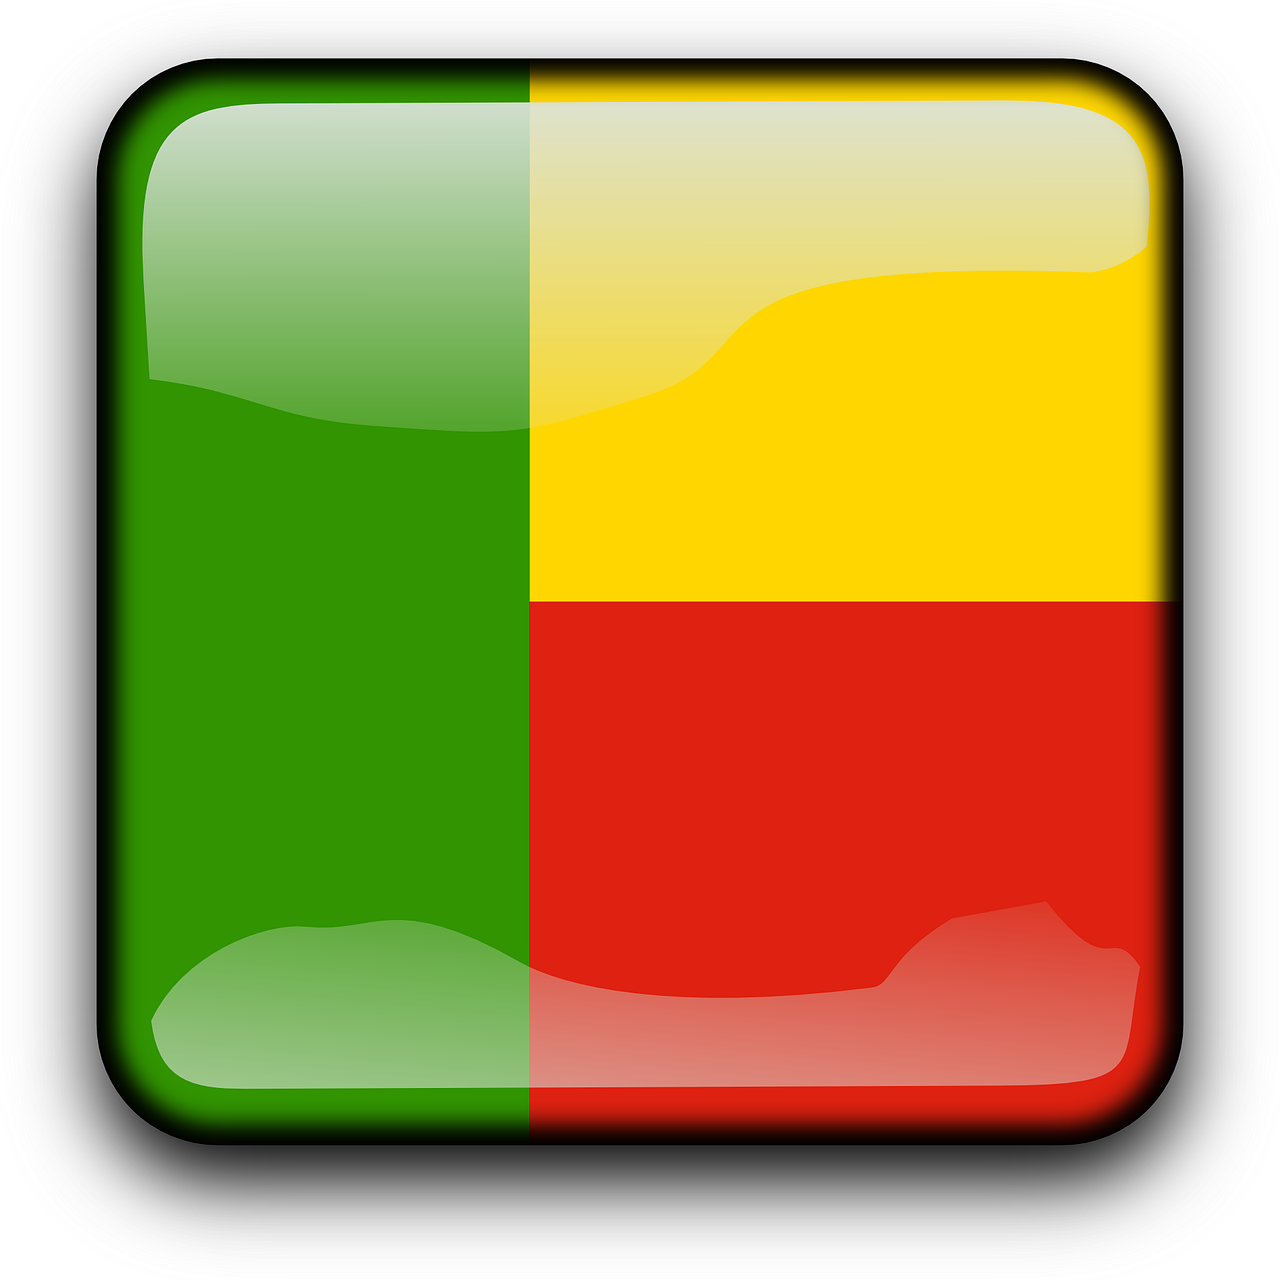 benin,flag,country,nationality,square,button,glossy,free vector graphics,free pictures, free photos, free images, royalty free, free illustrations, public domain